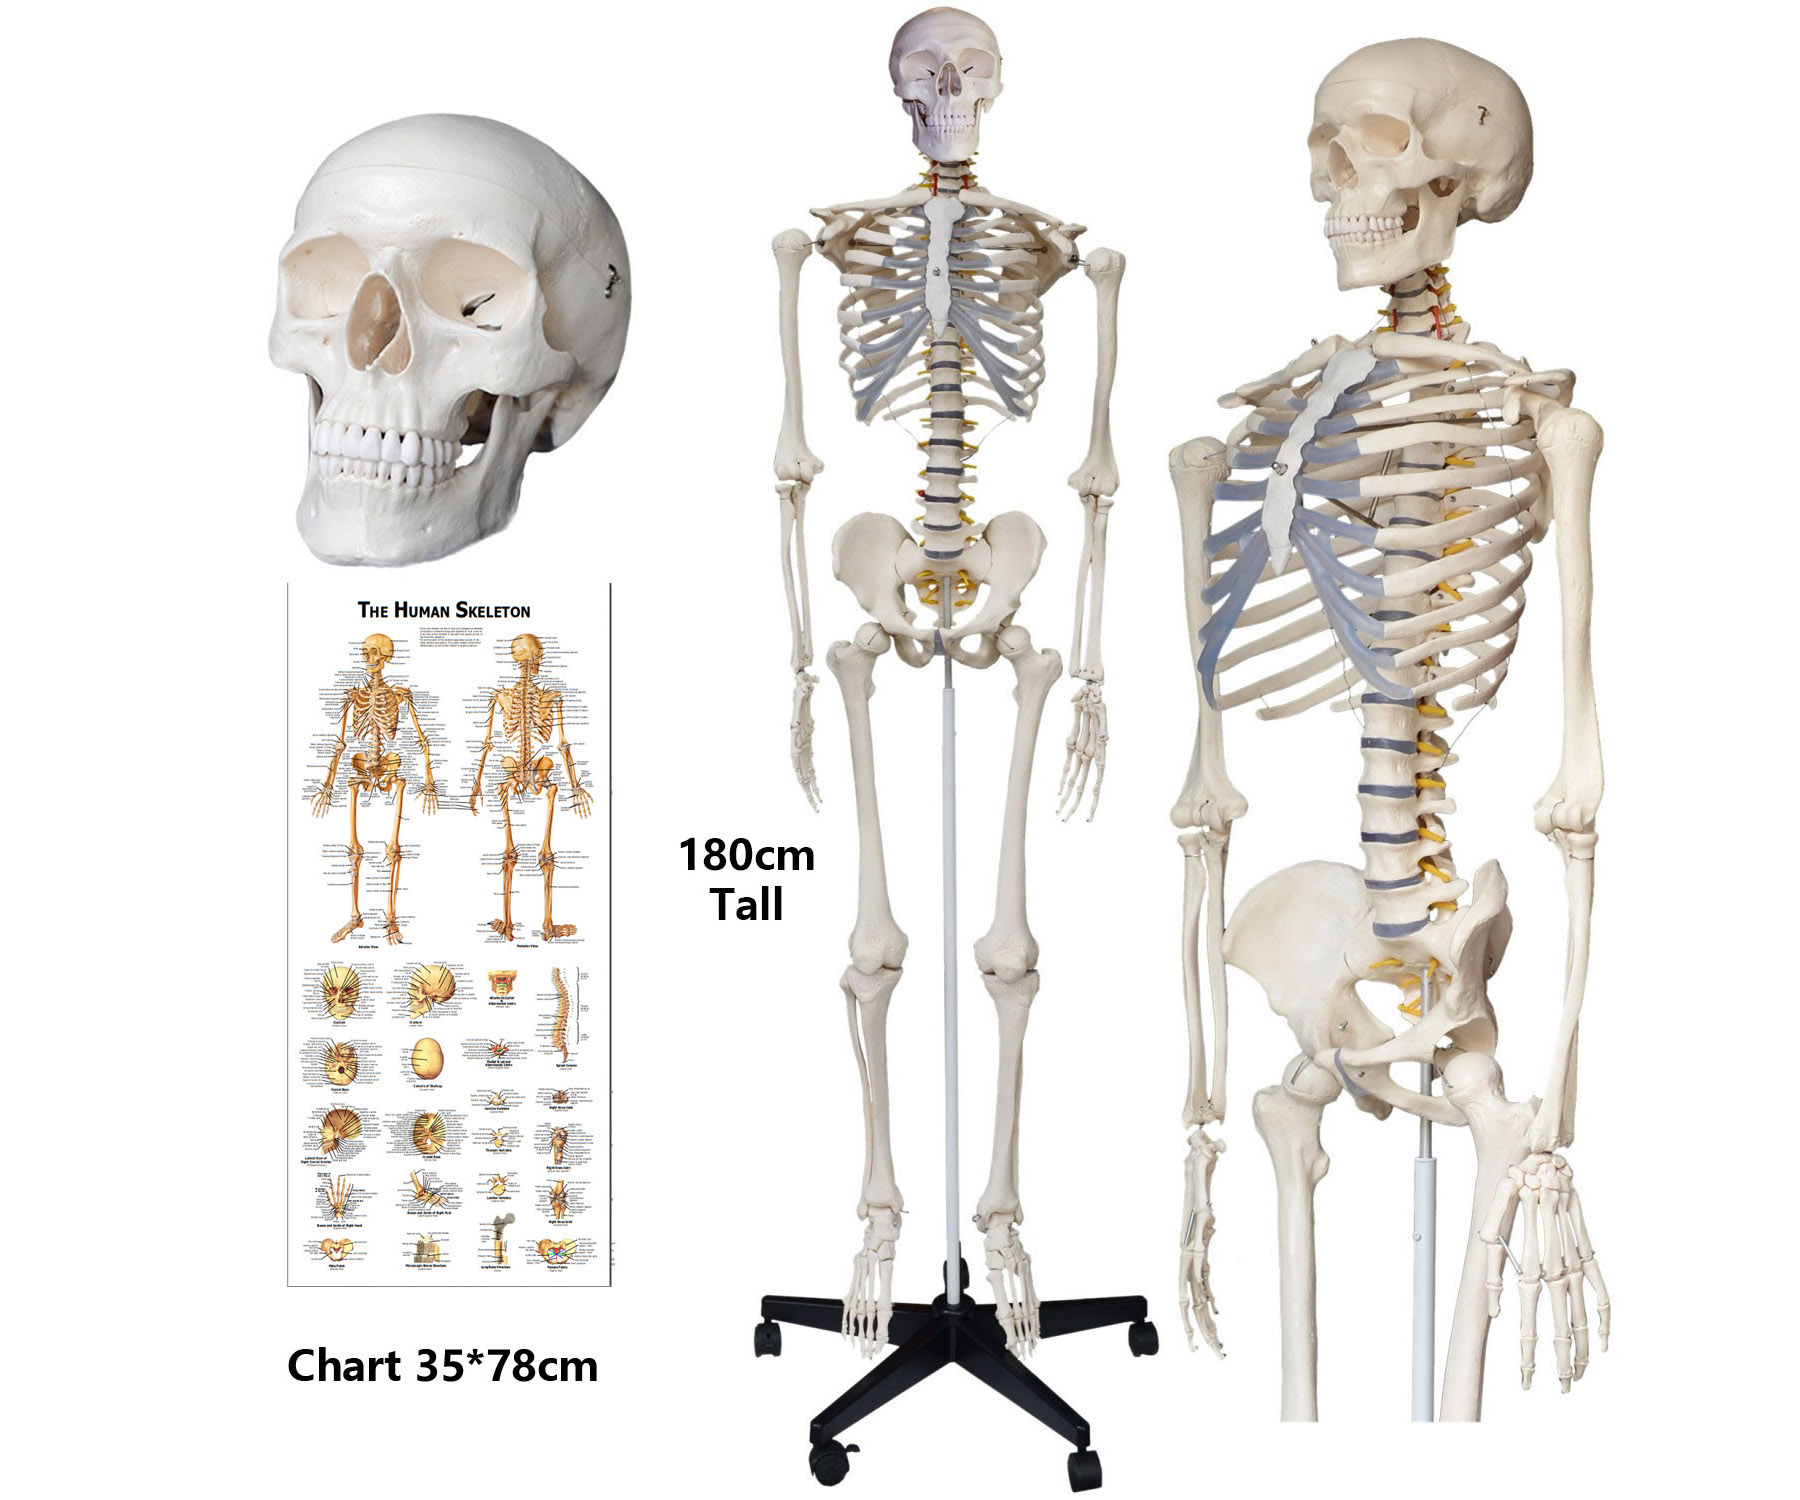 How accurate is a human body skeleton model compared to a real human skeleton?